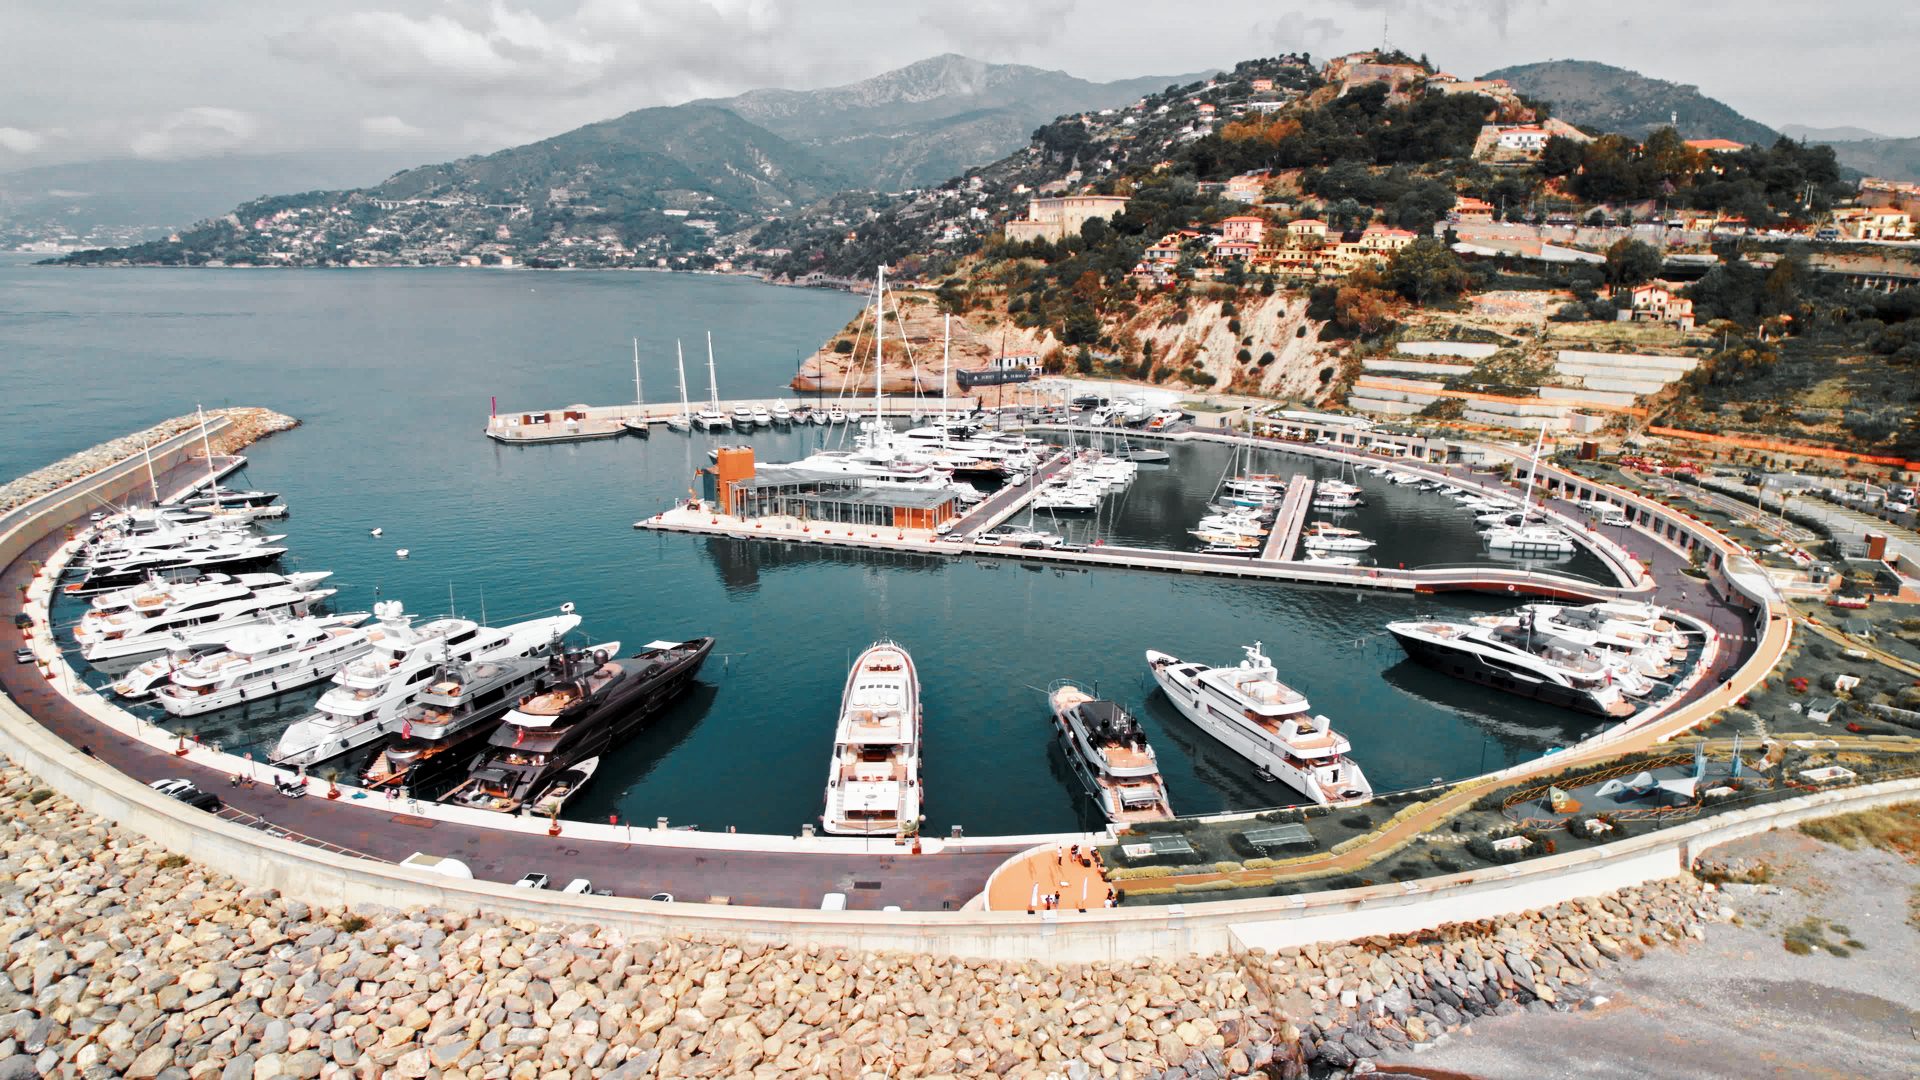 Port of Cala del forte with yachts and a hub for drone delivery